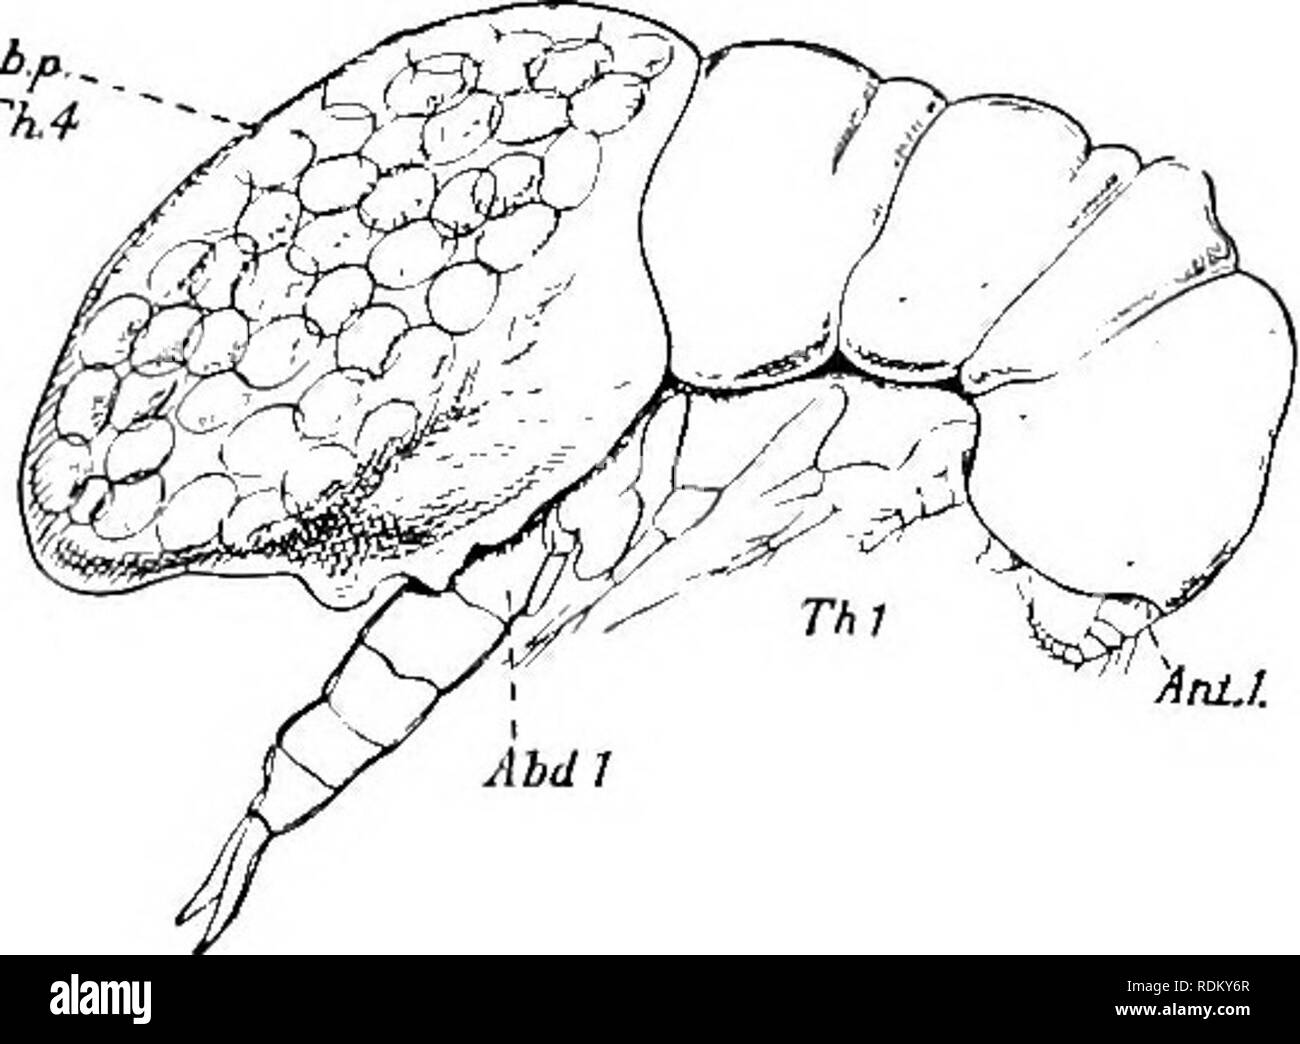 . The Cambridge natural history. Zoology. 66 CRUSTACEA COPEPODA chap. parasite. The adult organs now begin to be differentiated, as shown in Fig. 32, 0, from the undifferentiated cellular elements of the N^auplius, the future adult organism being enclosed in a spiny coat from which it escapes. At this stage it occupies a large part of its host's body, lying in the distended ventral blood- vessel, and it escapes to the outside world by rupturing the body- wall of the worm, leaving behind it the second antennae, which have performed their function as a kind of placenta. Malaquin, to whom we owe  Stock Photo